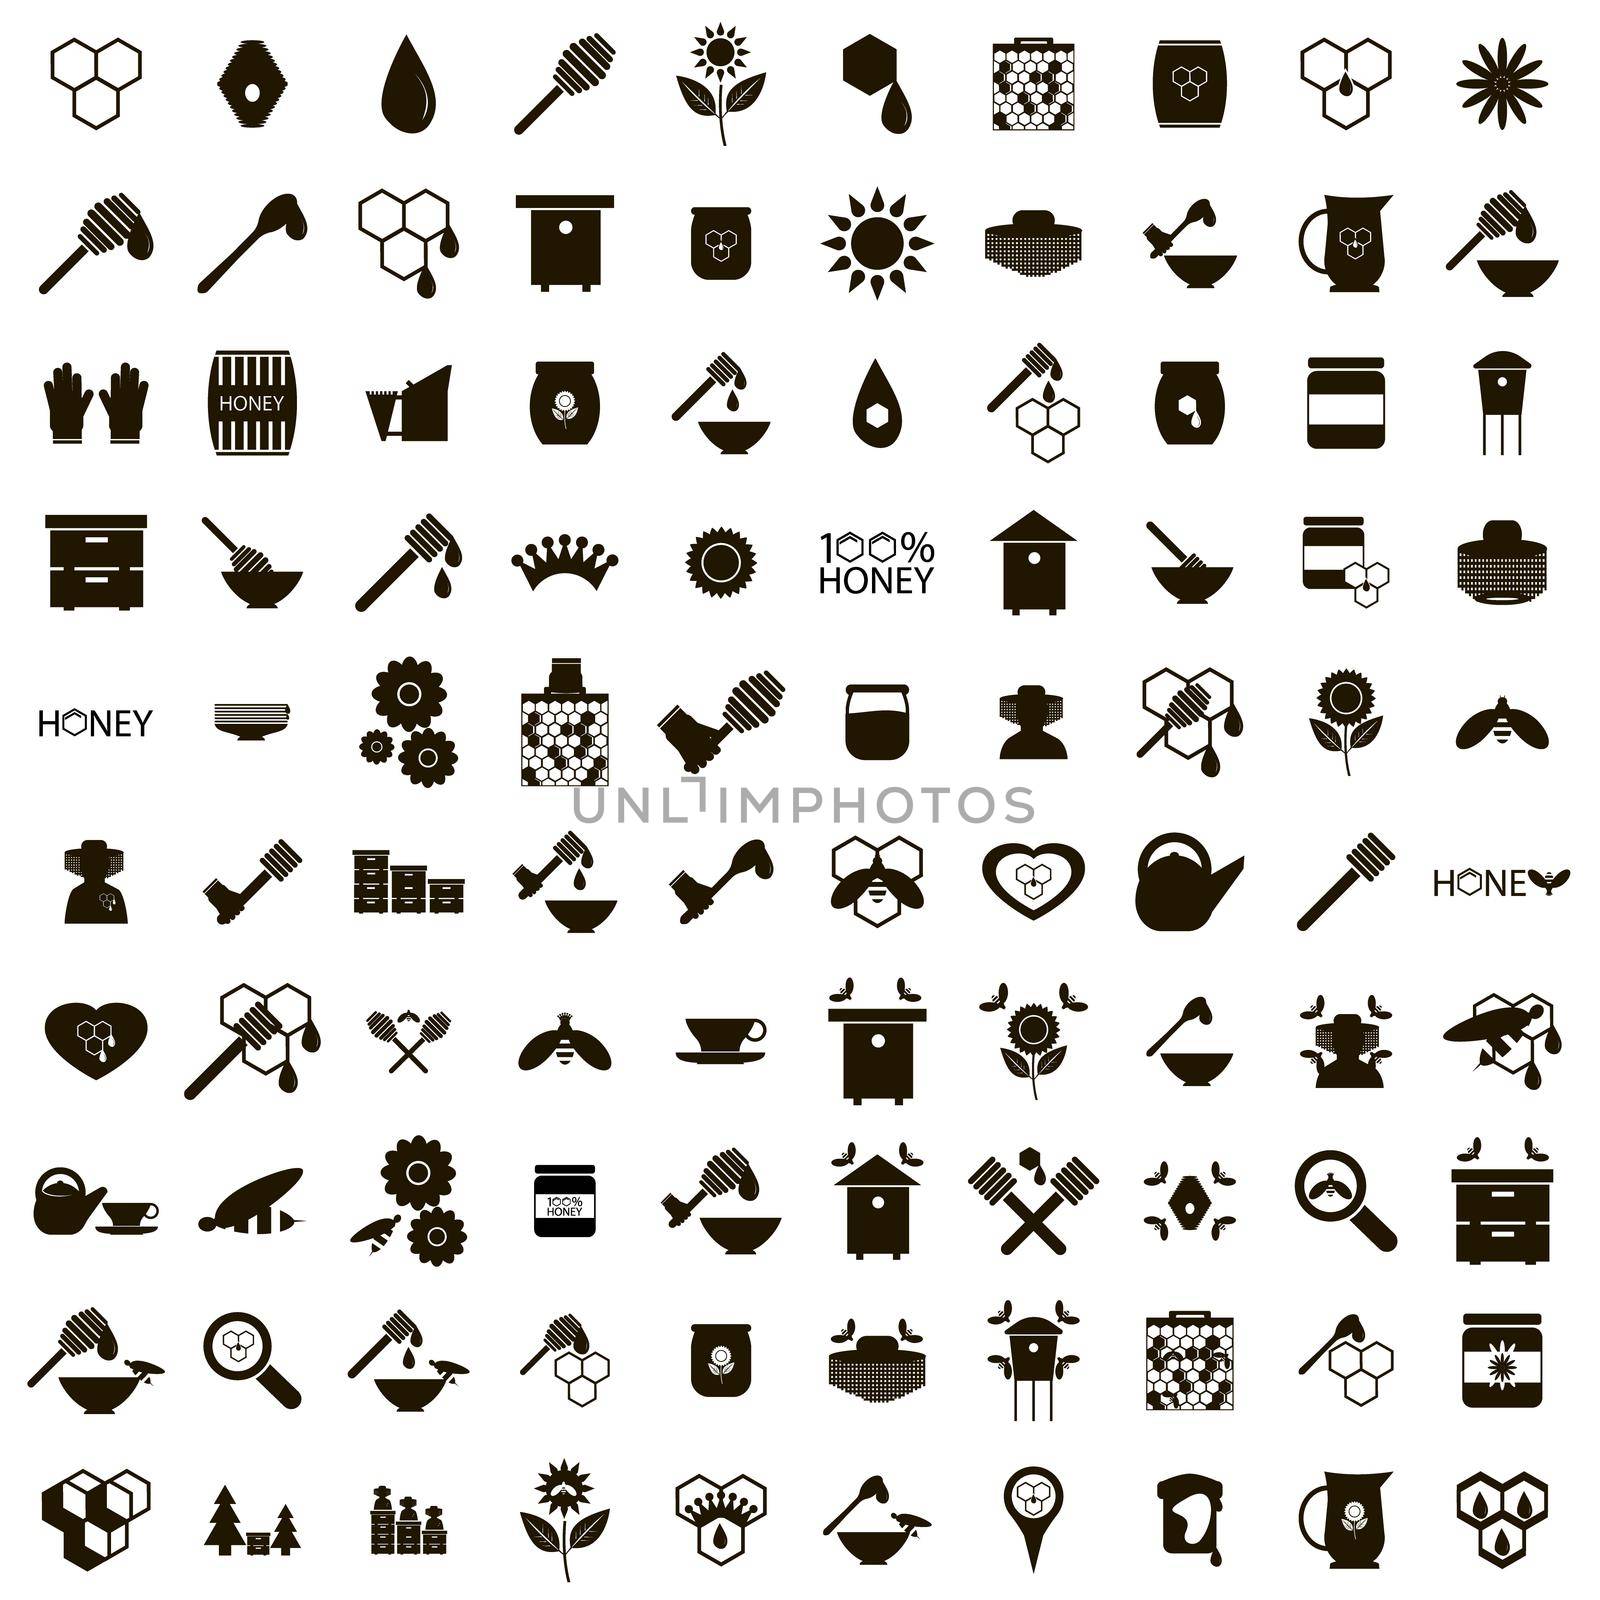 100 Apiary icons set by ylivdesign